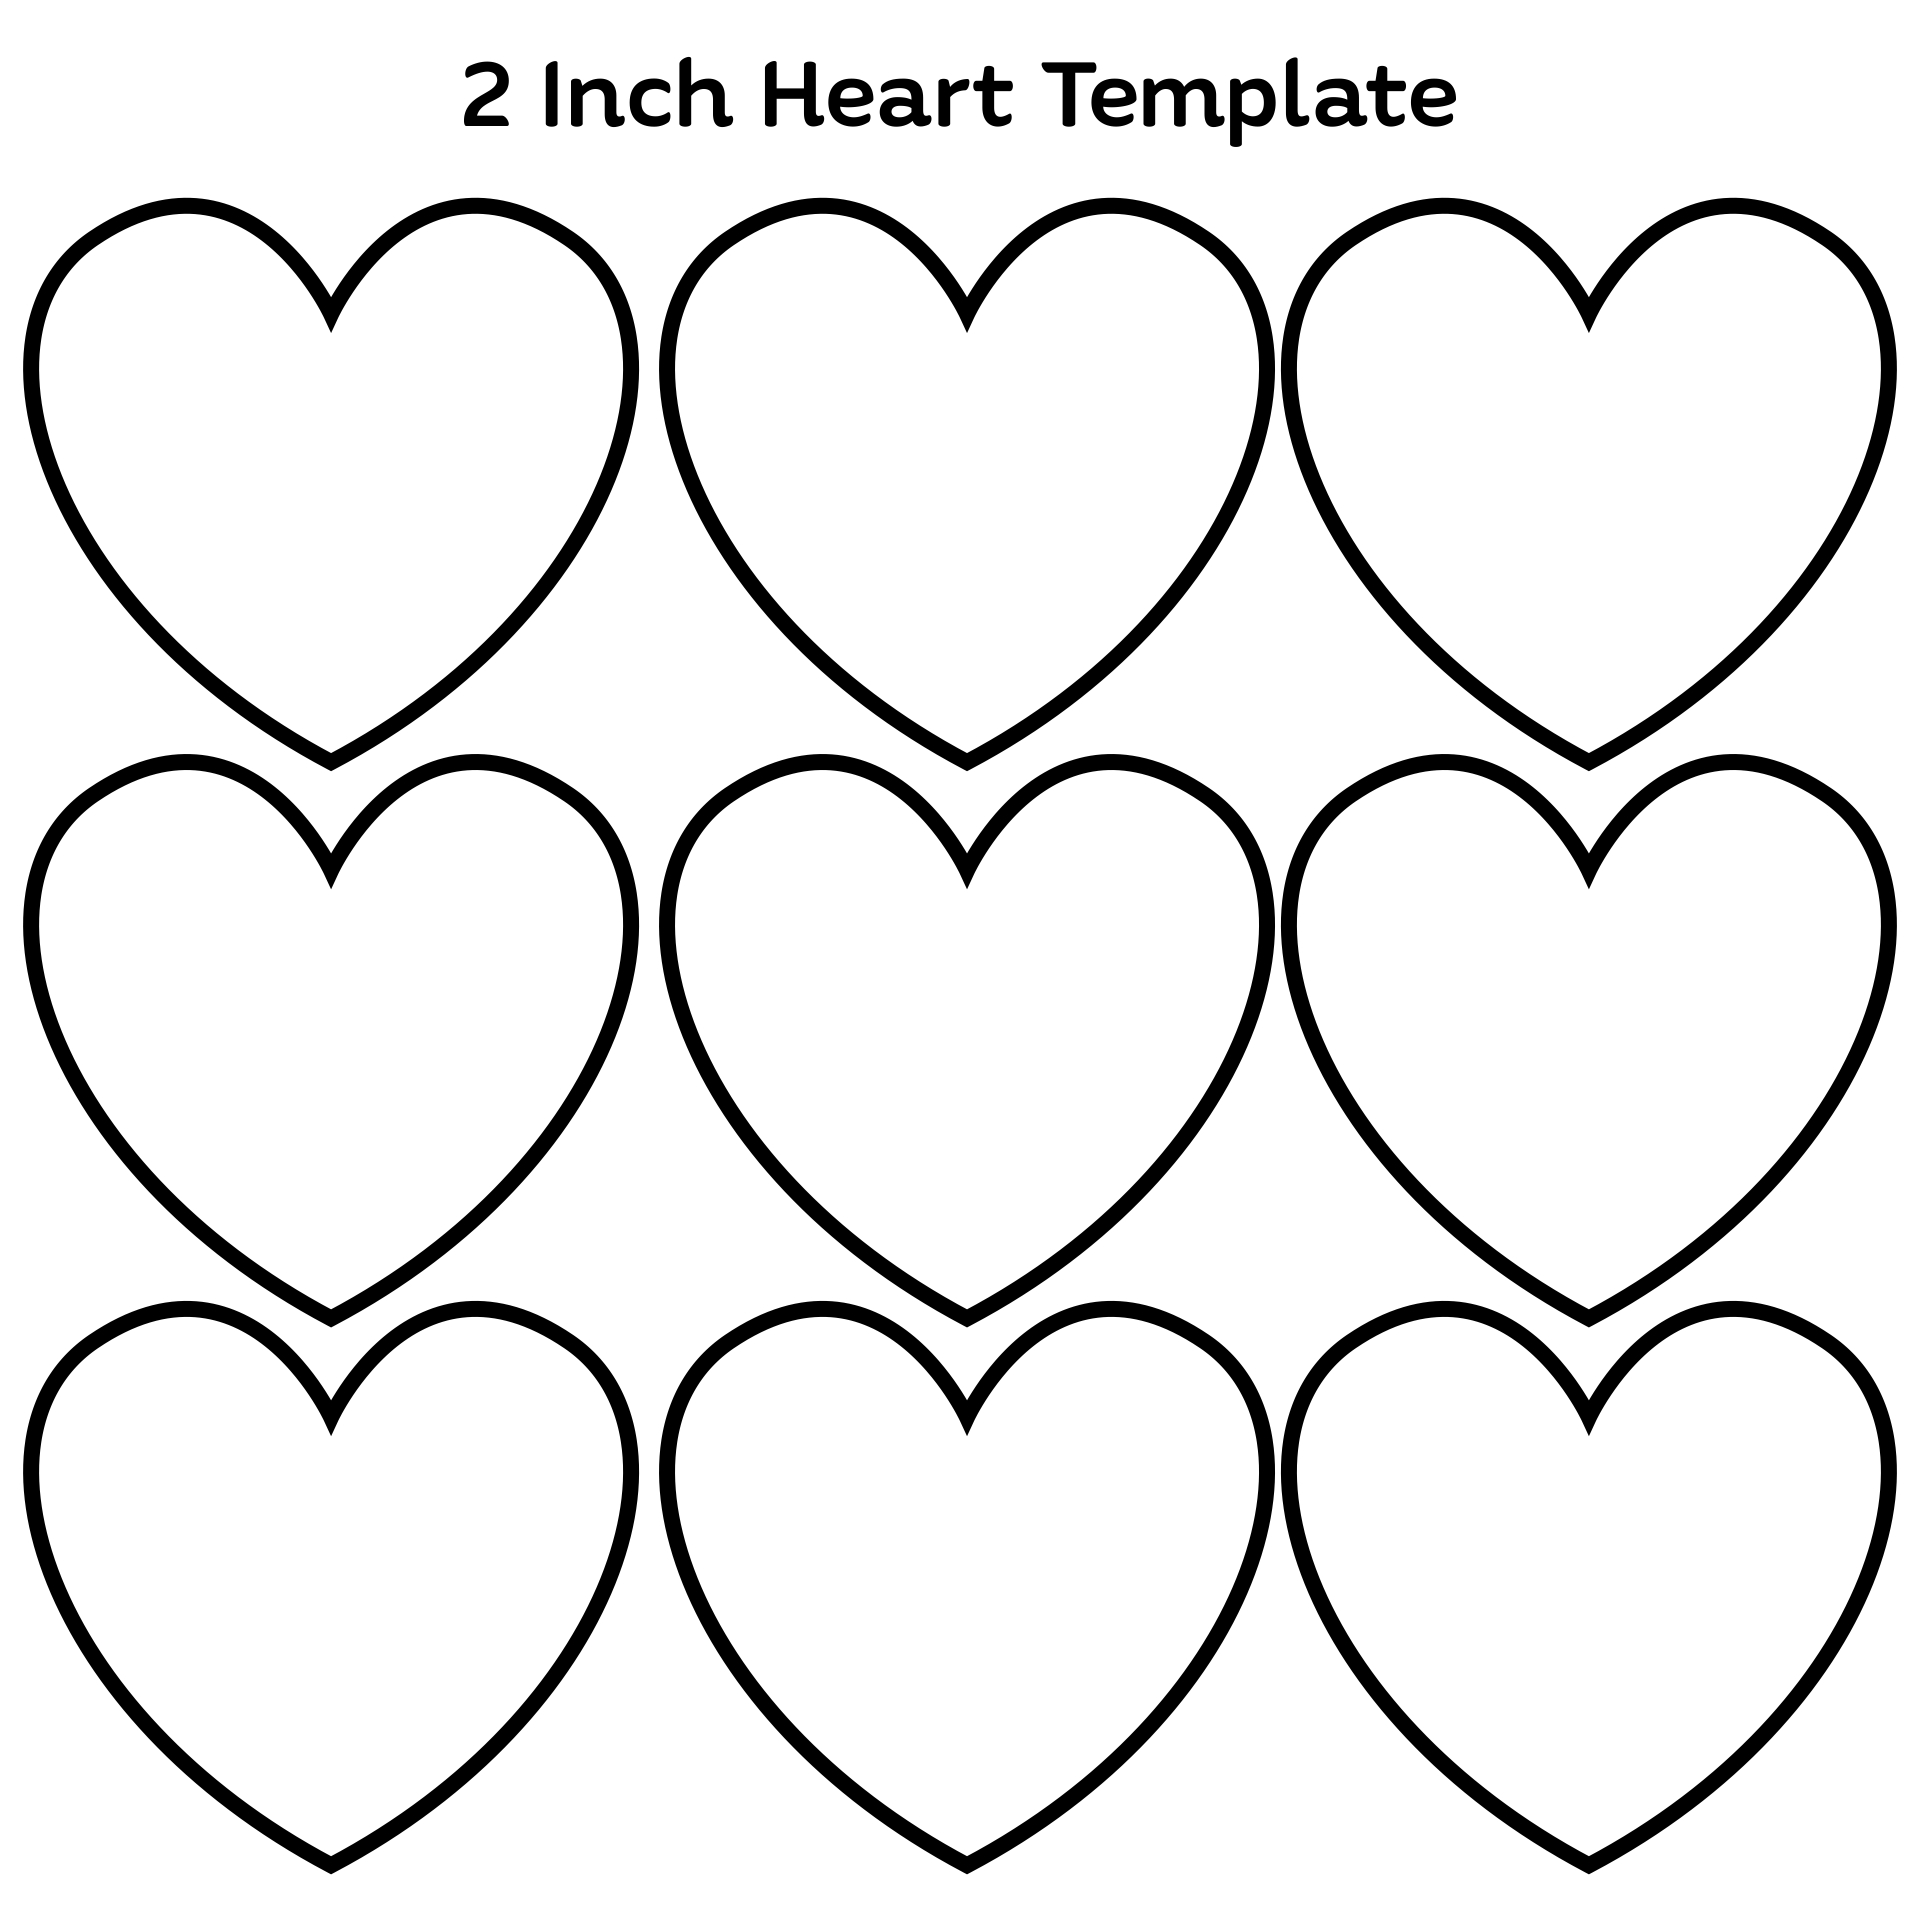 2 Inch Heart Template Printable